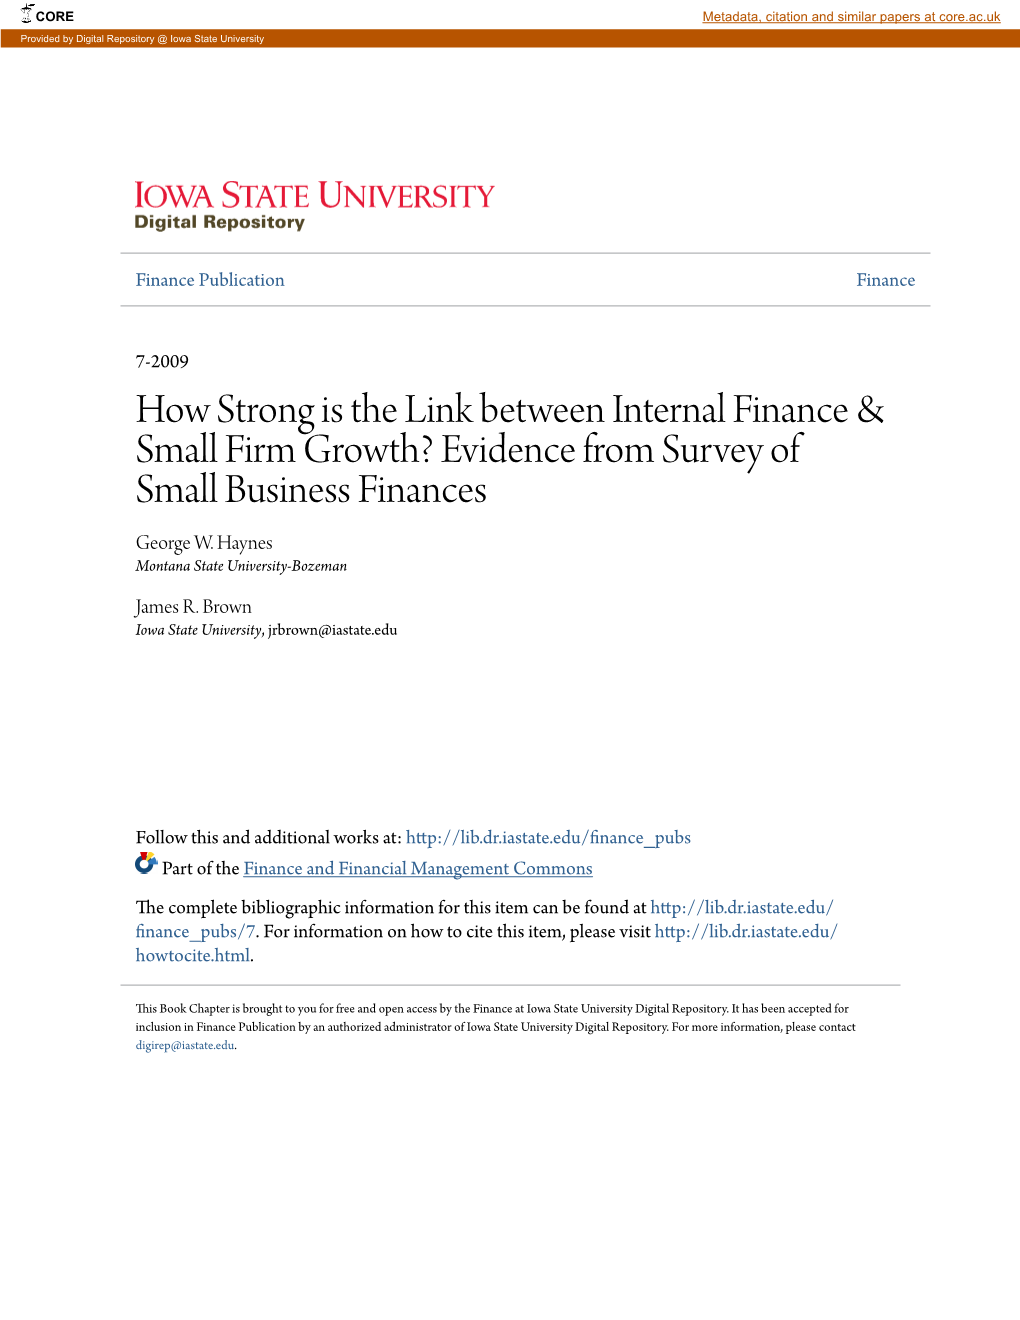 How Strong Is the Link Between Internal Finance & Small